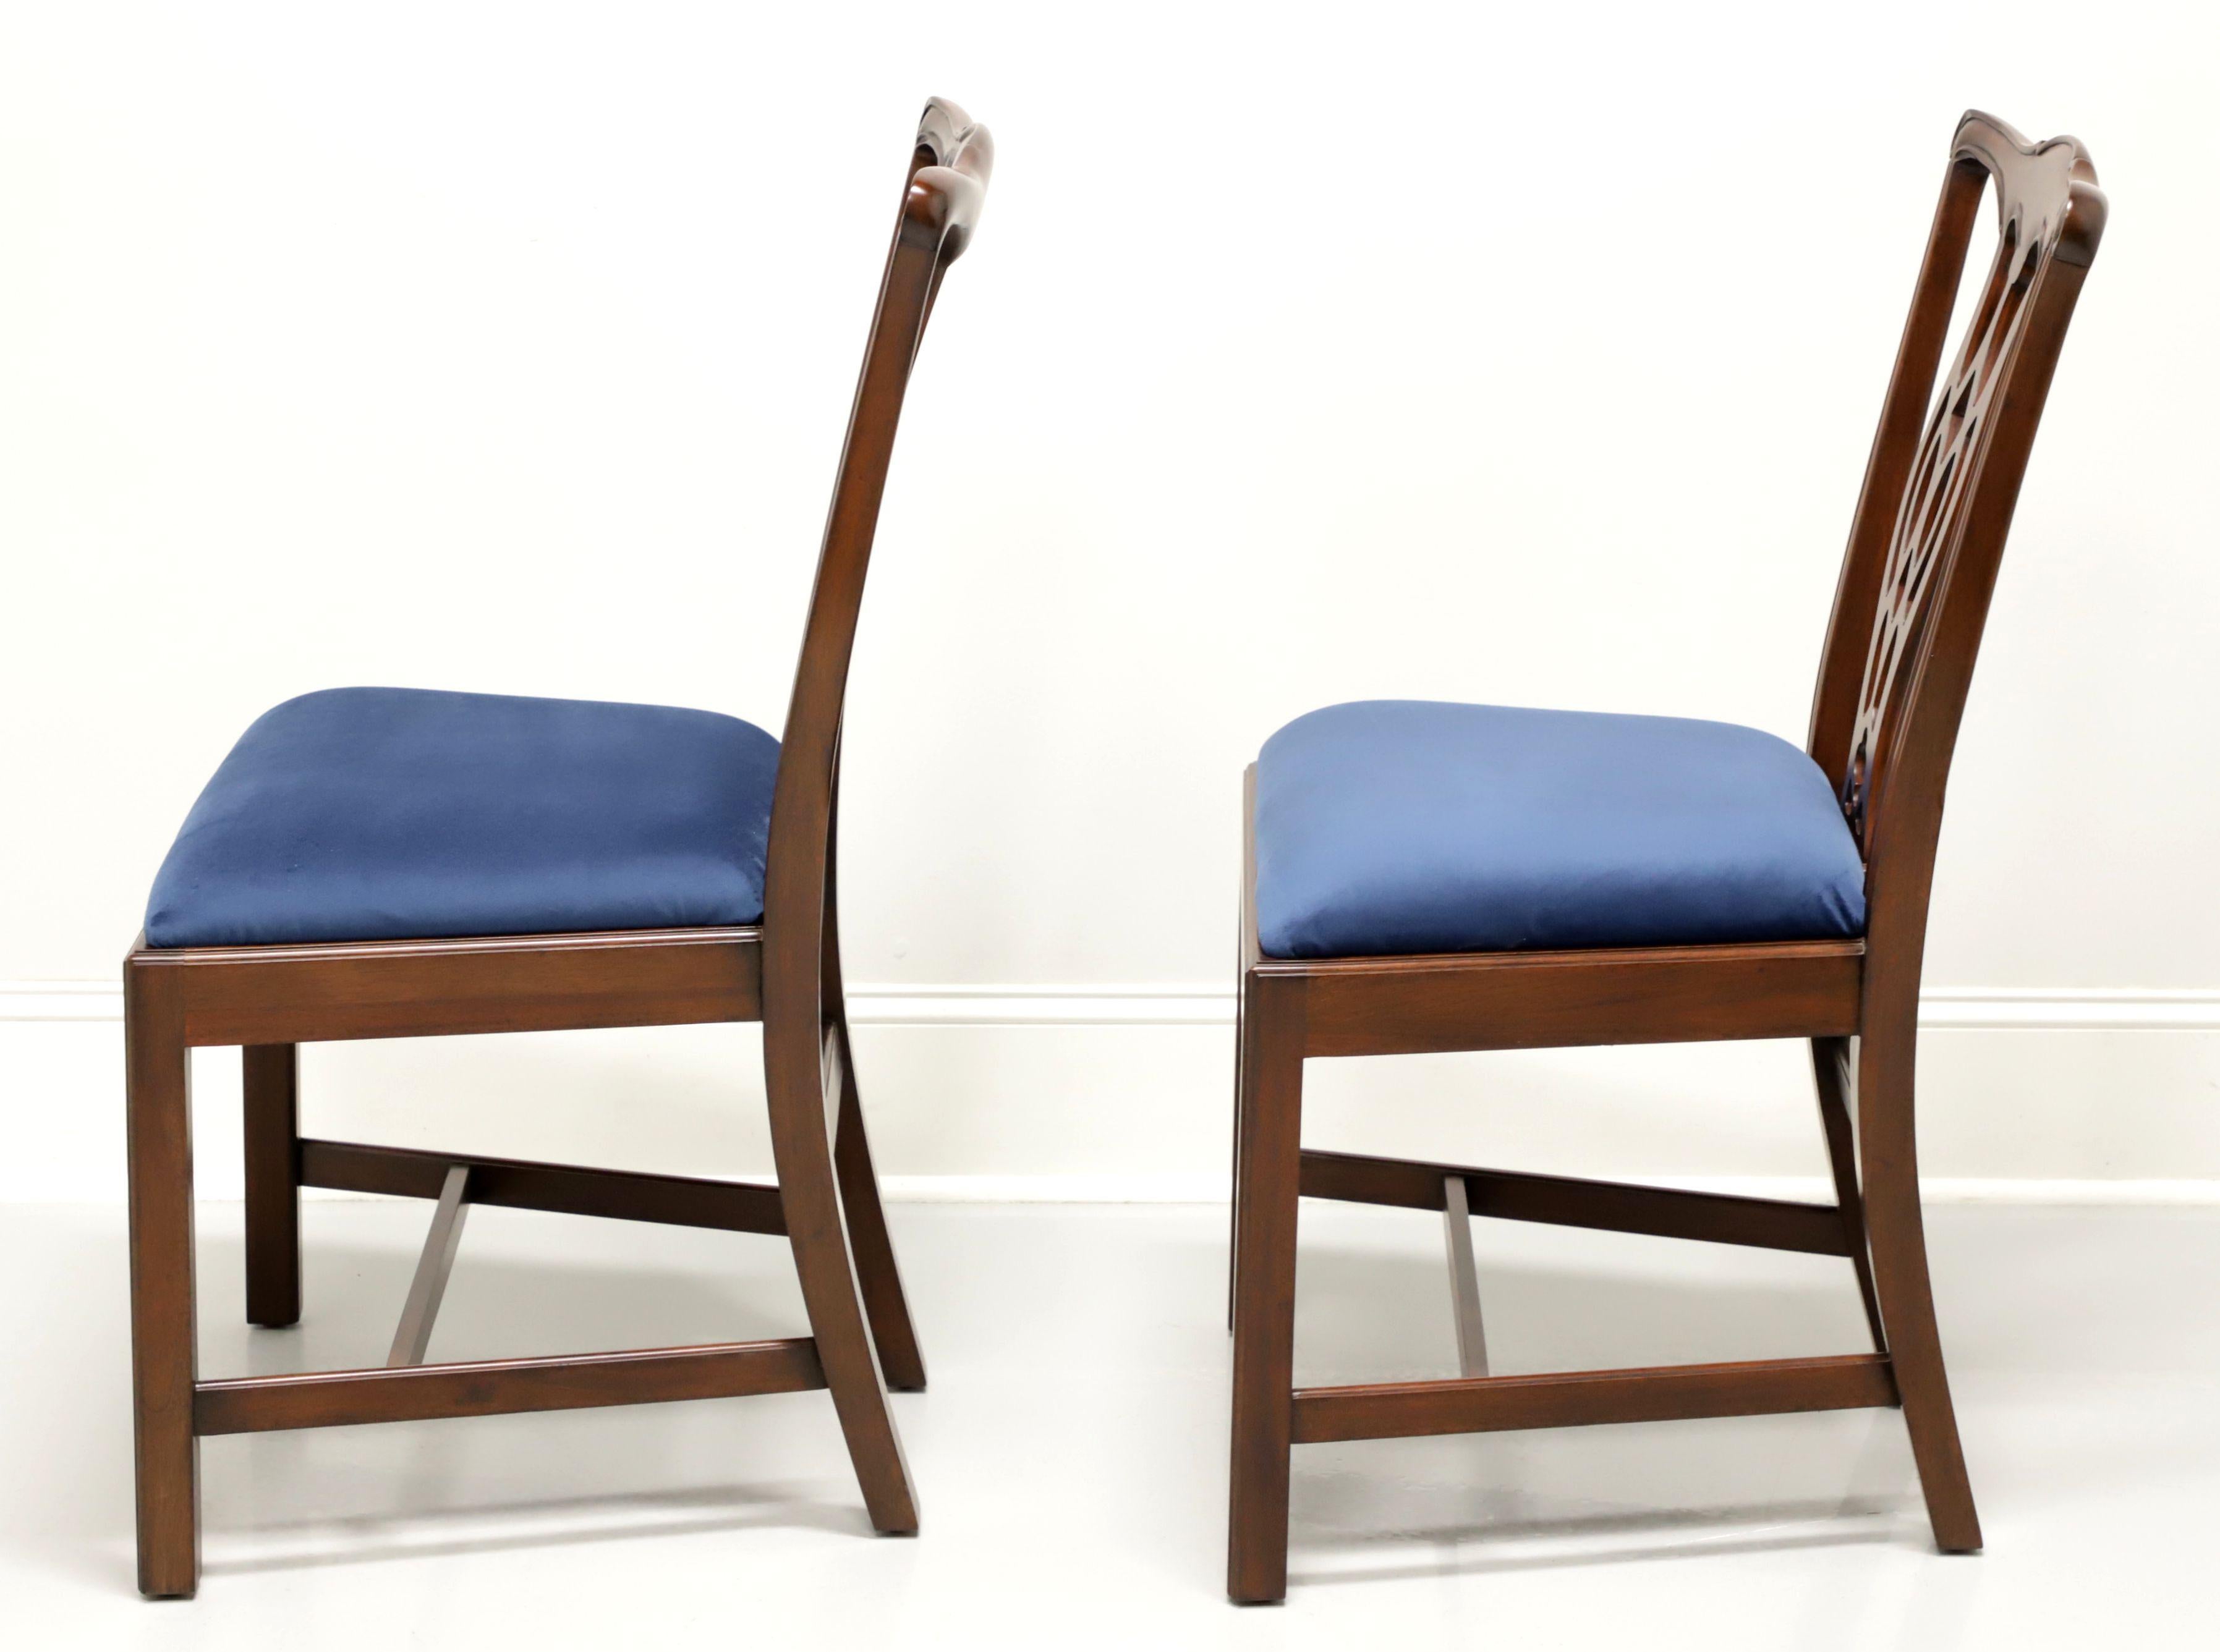 20th Century HICKORY CHAIR Mahogany Chippendale Straight Leg Dining Side Chairs - Pair